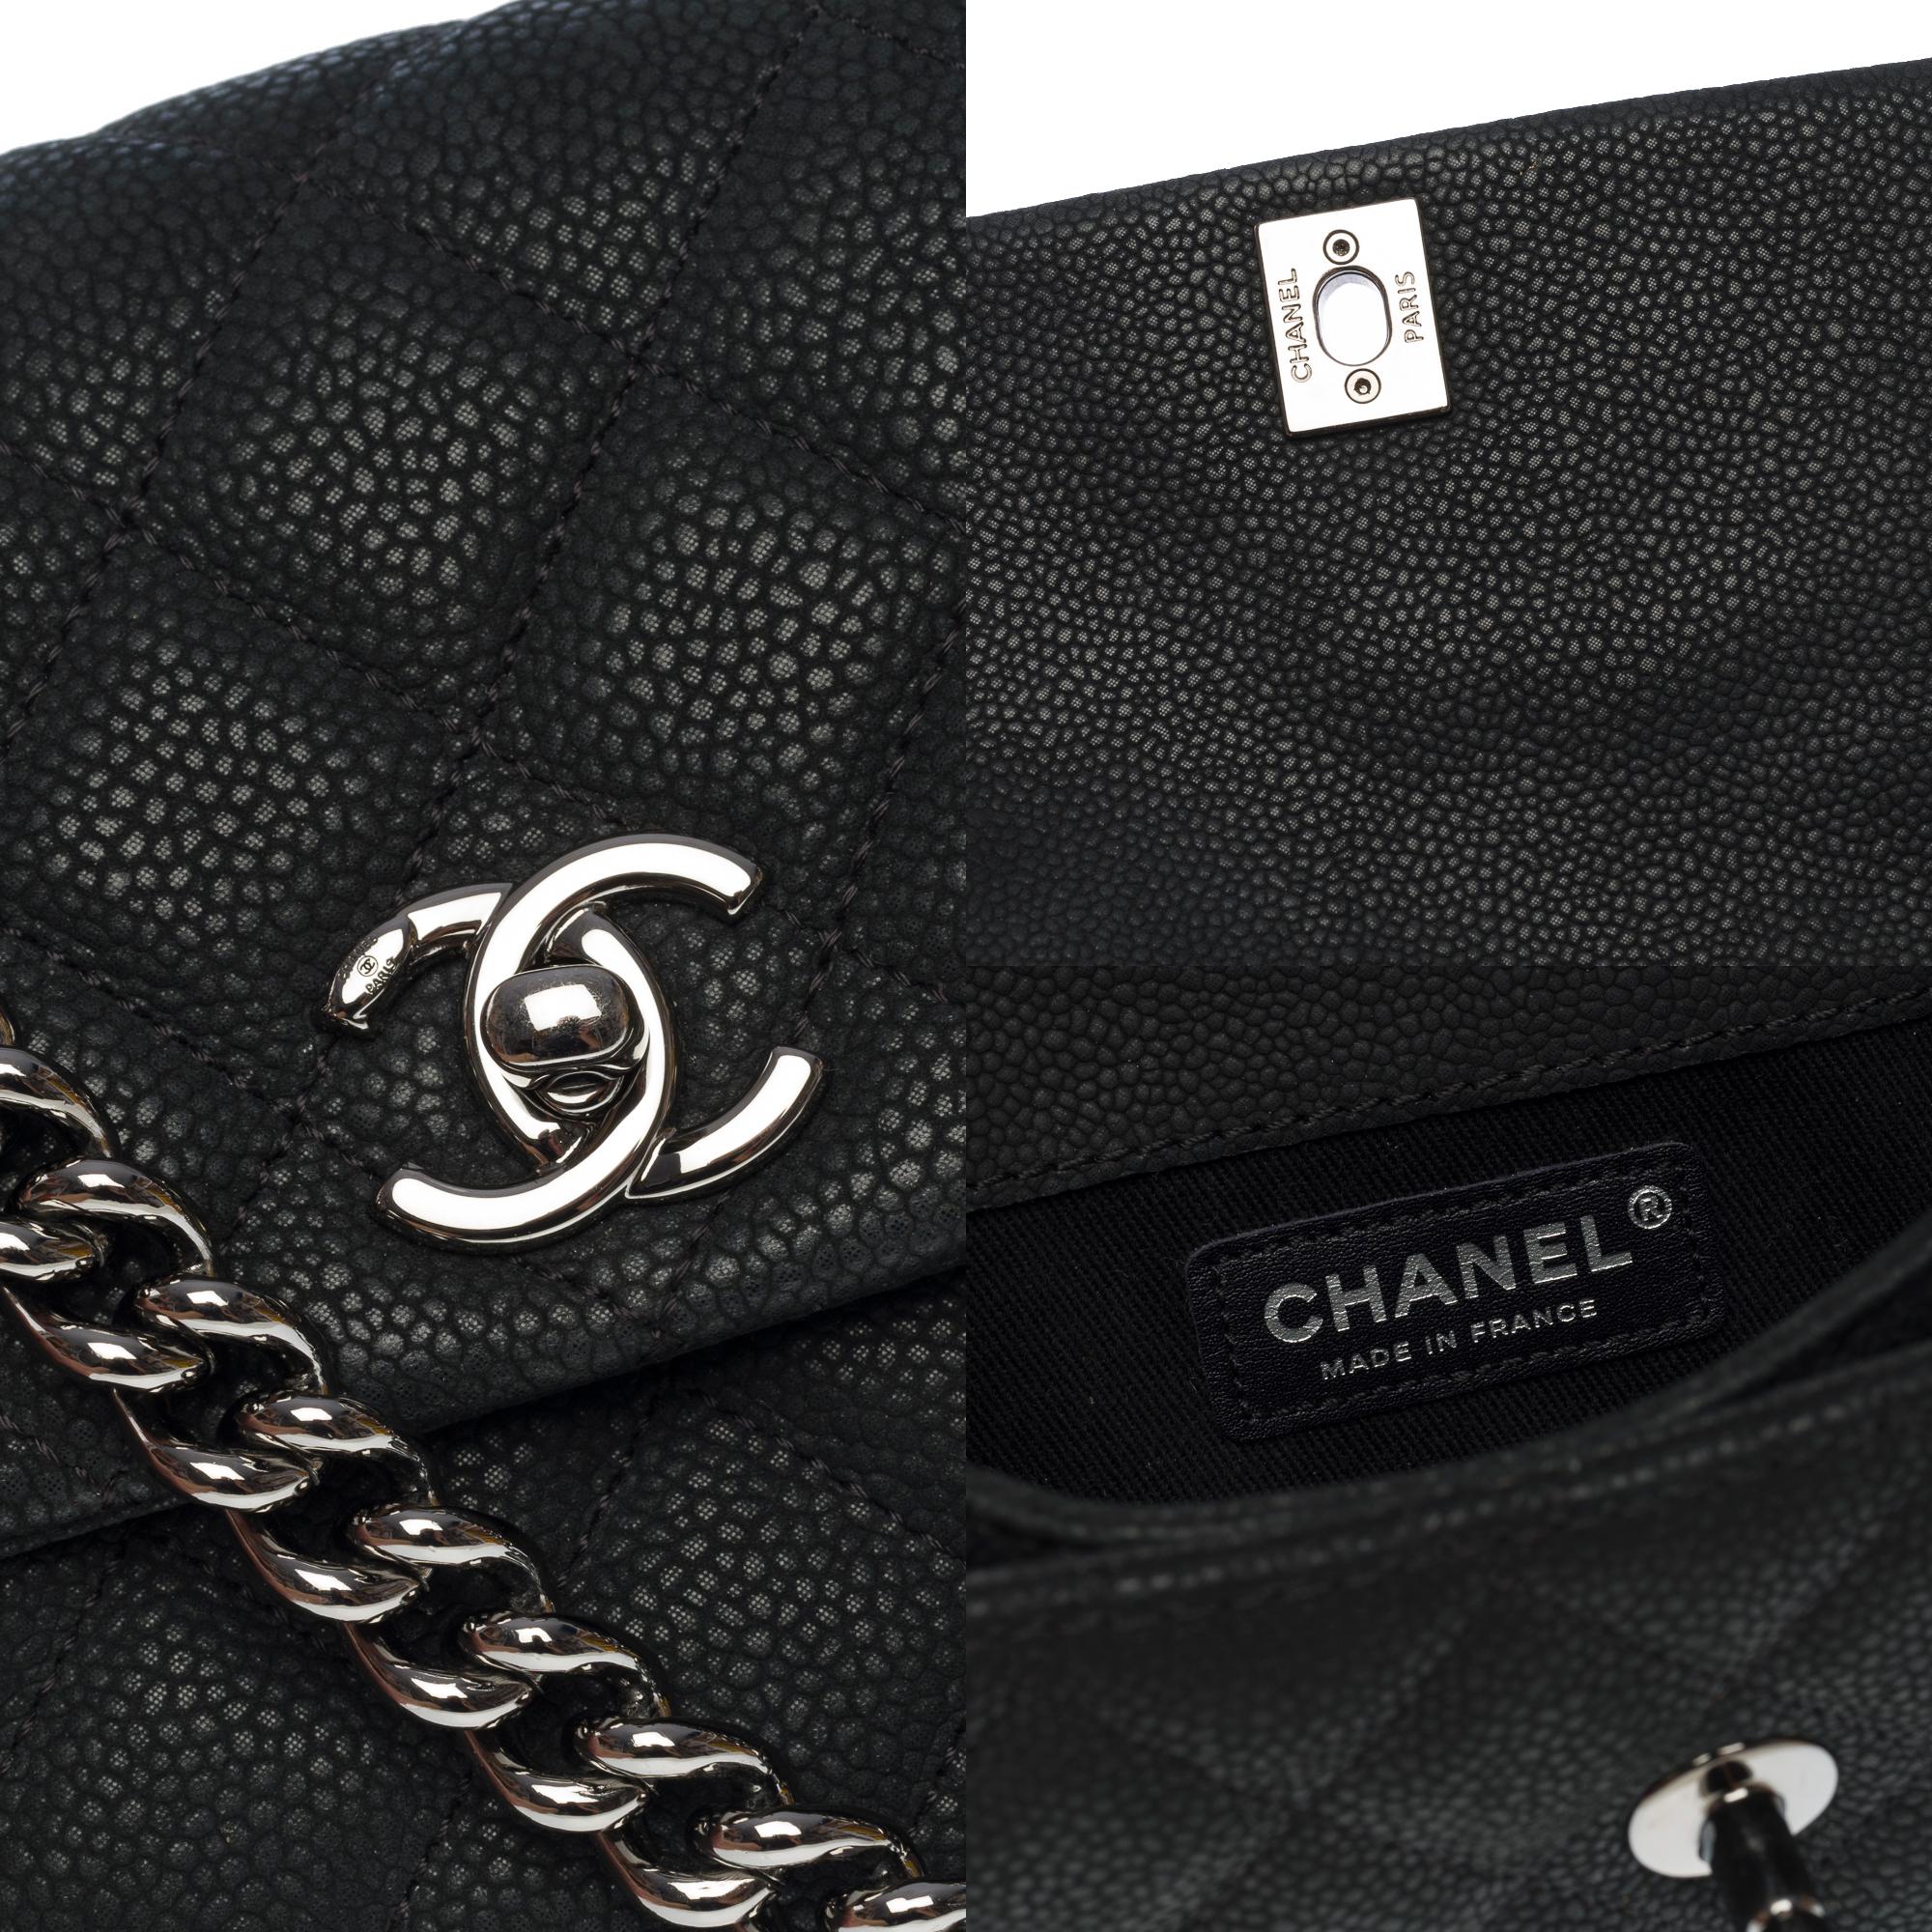 Amazing Chanel Timeless Mini flap shoulder bag in Black Caviar leather, SHW For Sale 2